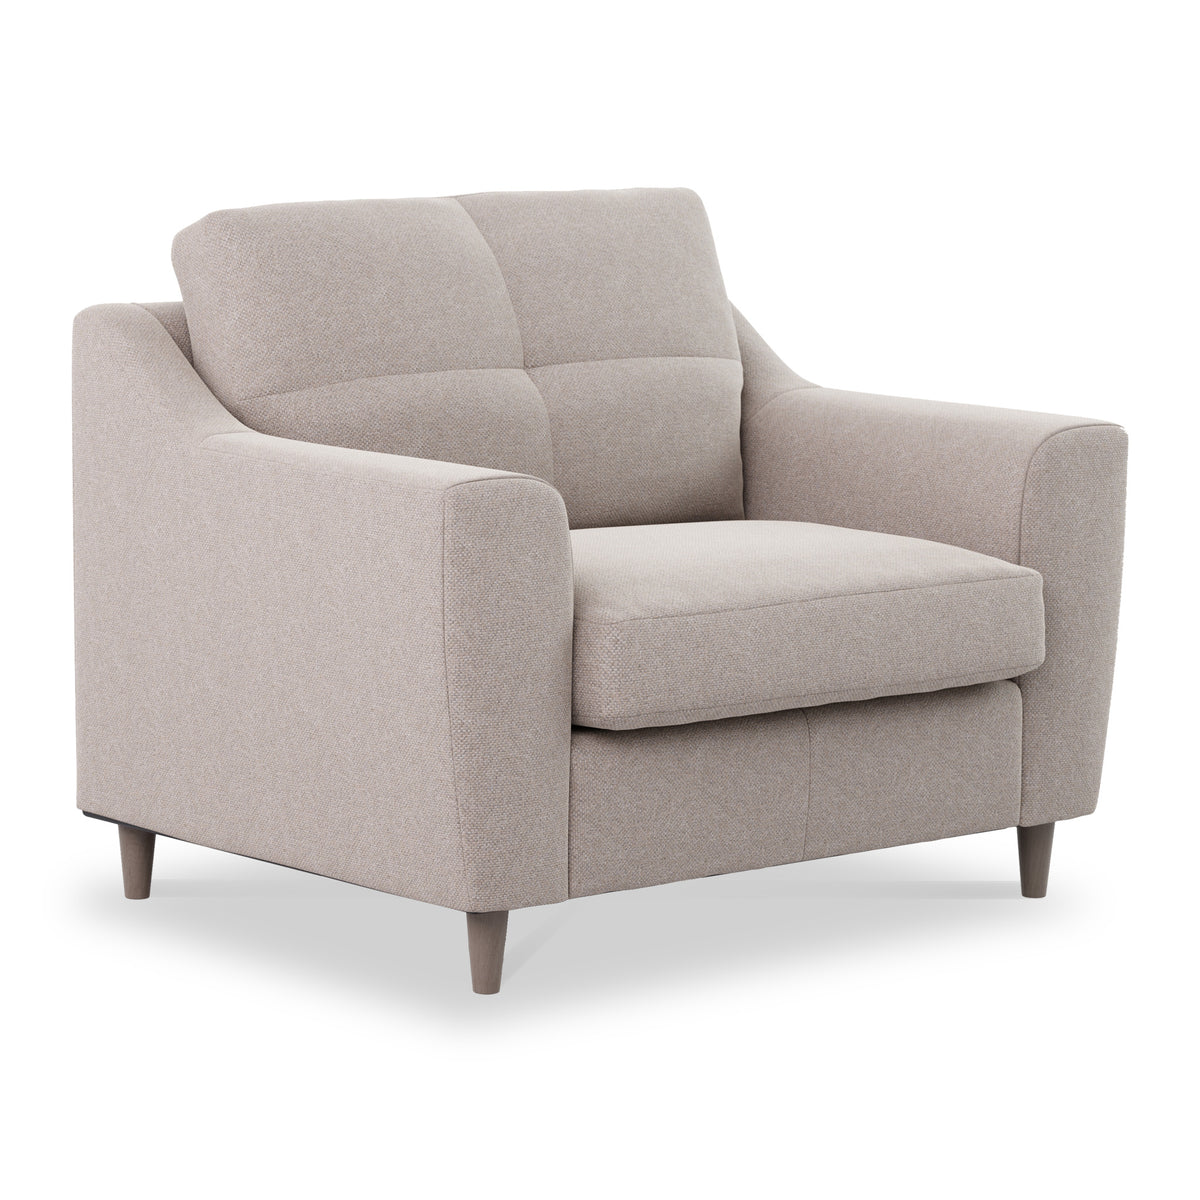 Justin Oatmeal Snuggle Armchair from Roseland Furniture